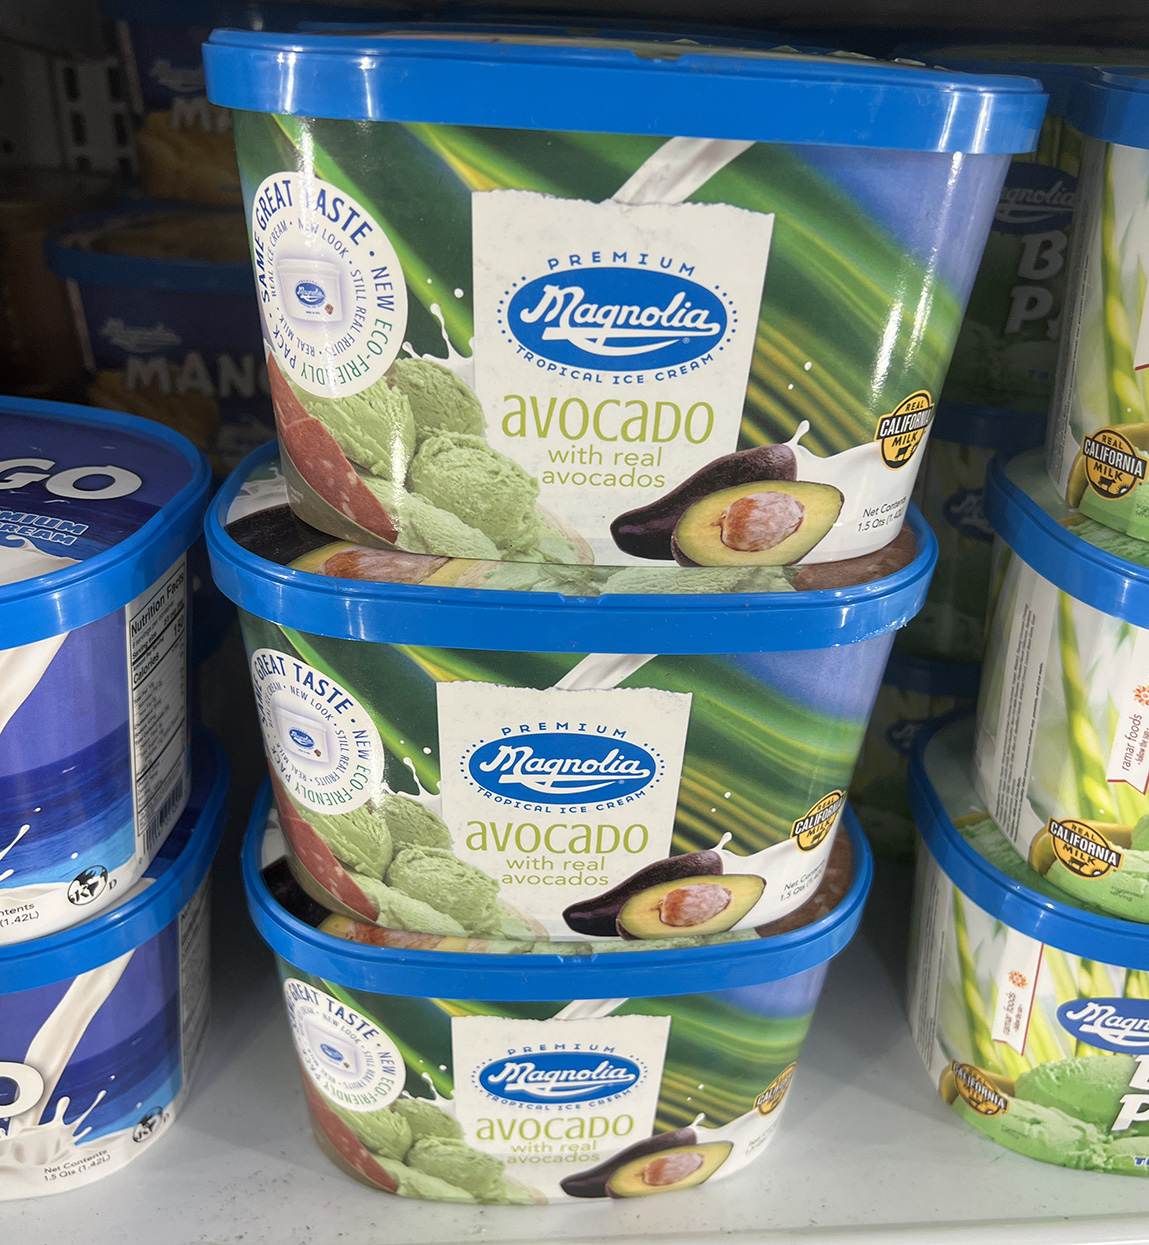 Avocado ice cream - Seafood City Supermarket in Irvine, California - Photo by Julie Nguyen